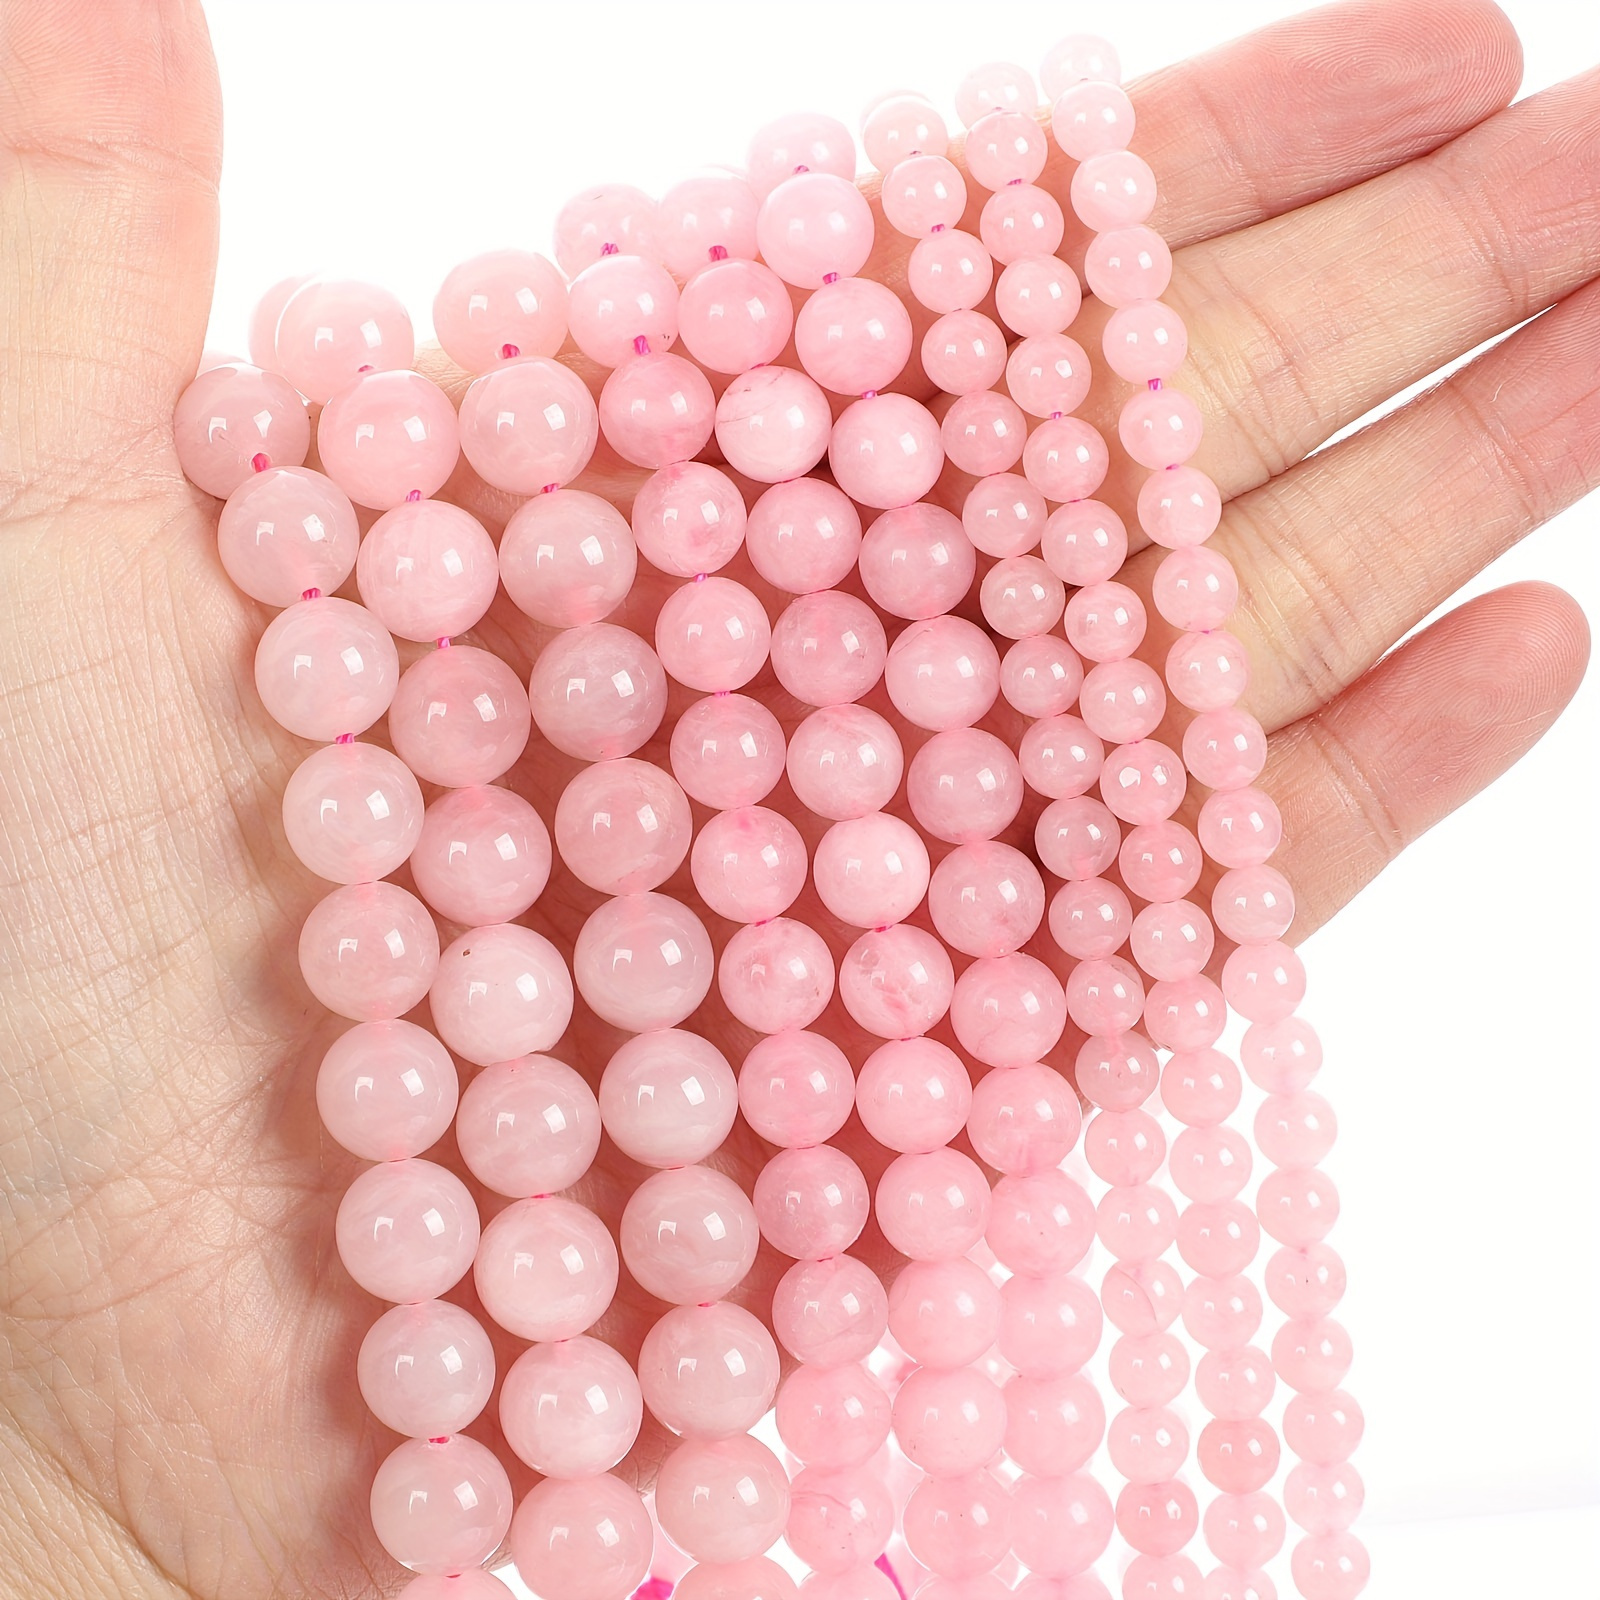 

Natural Stone Beads Rose Quartz Charm Round Loose Beads For Jewelry Making Bracelet Diy Needlework Accessories 4-12mm